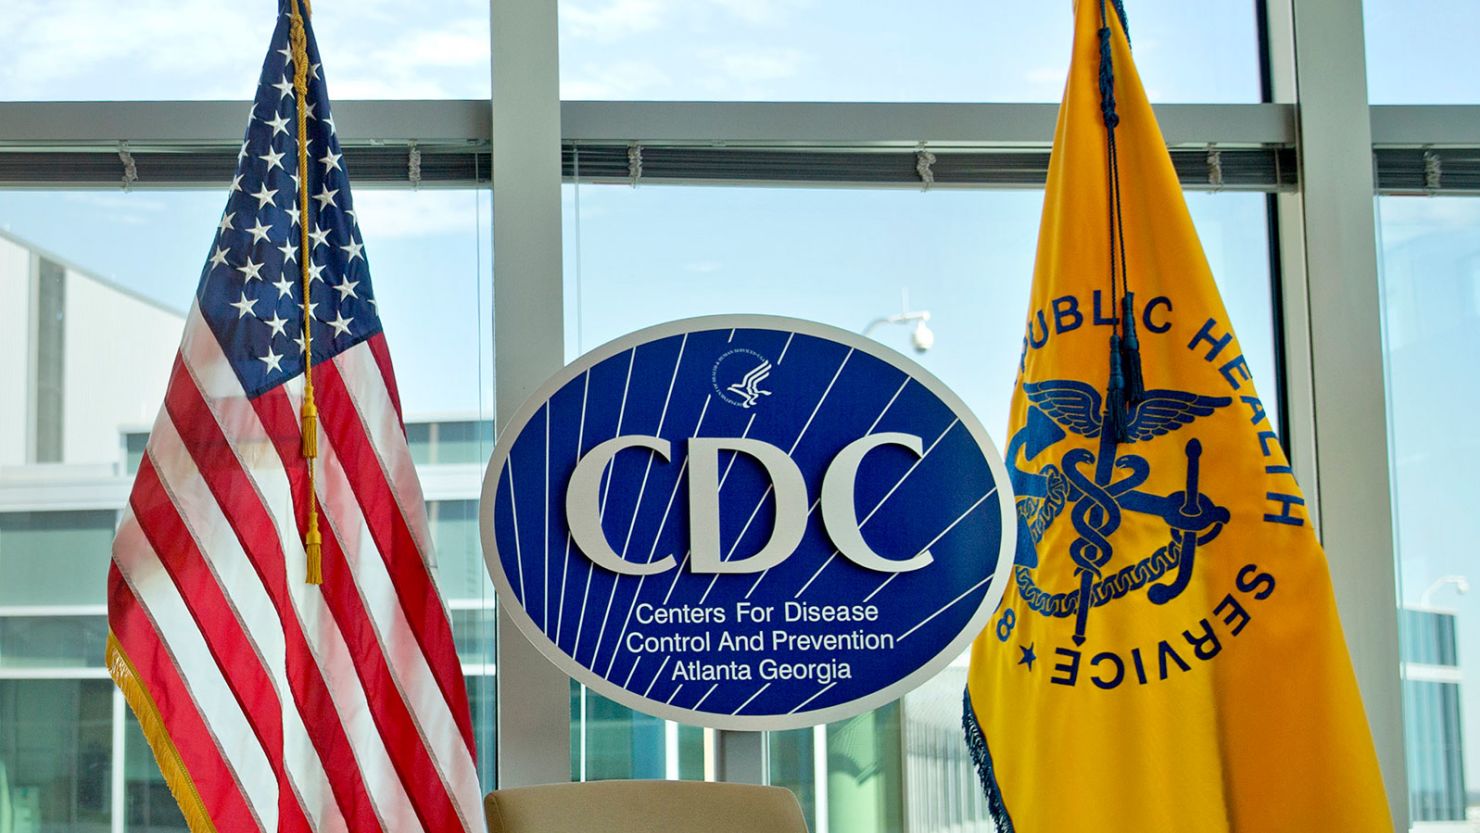 CDC facing major funding cuts, with direct impact on state and local health departments | CNN